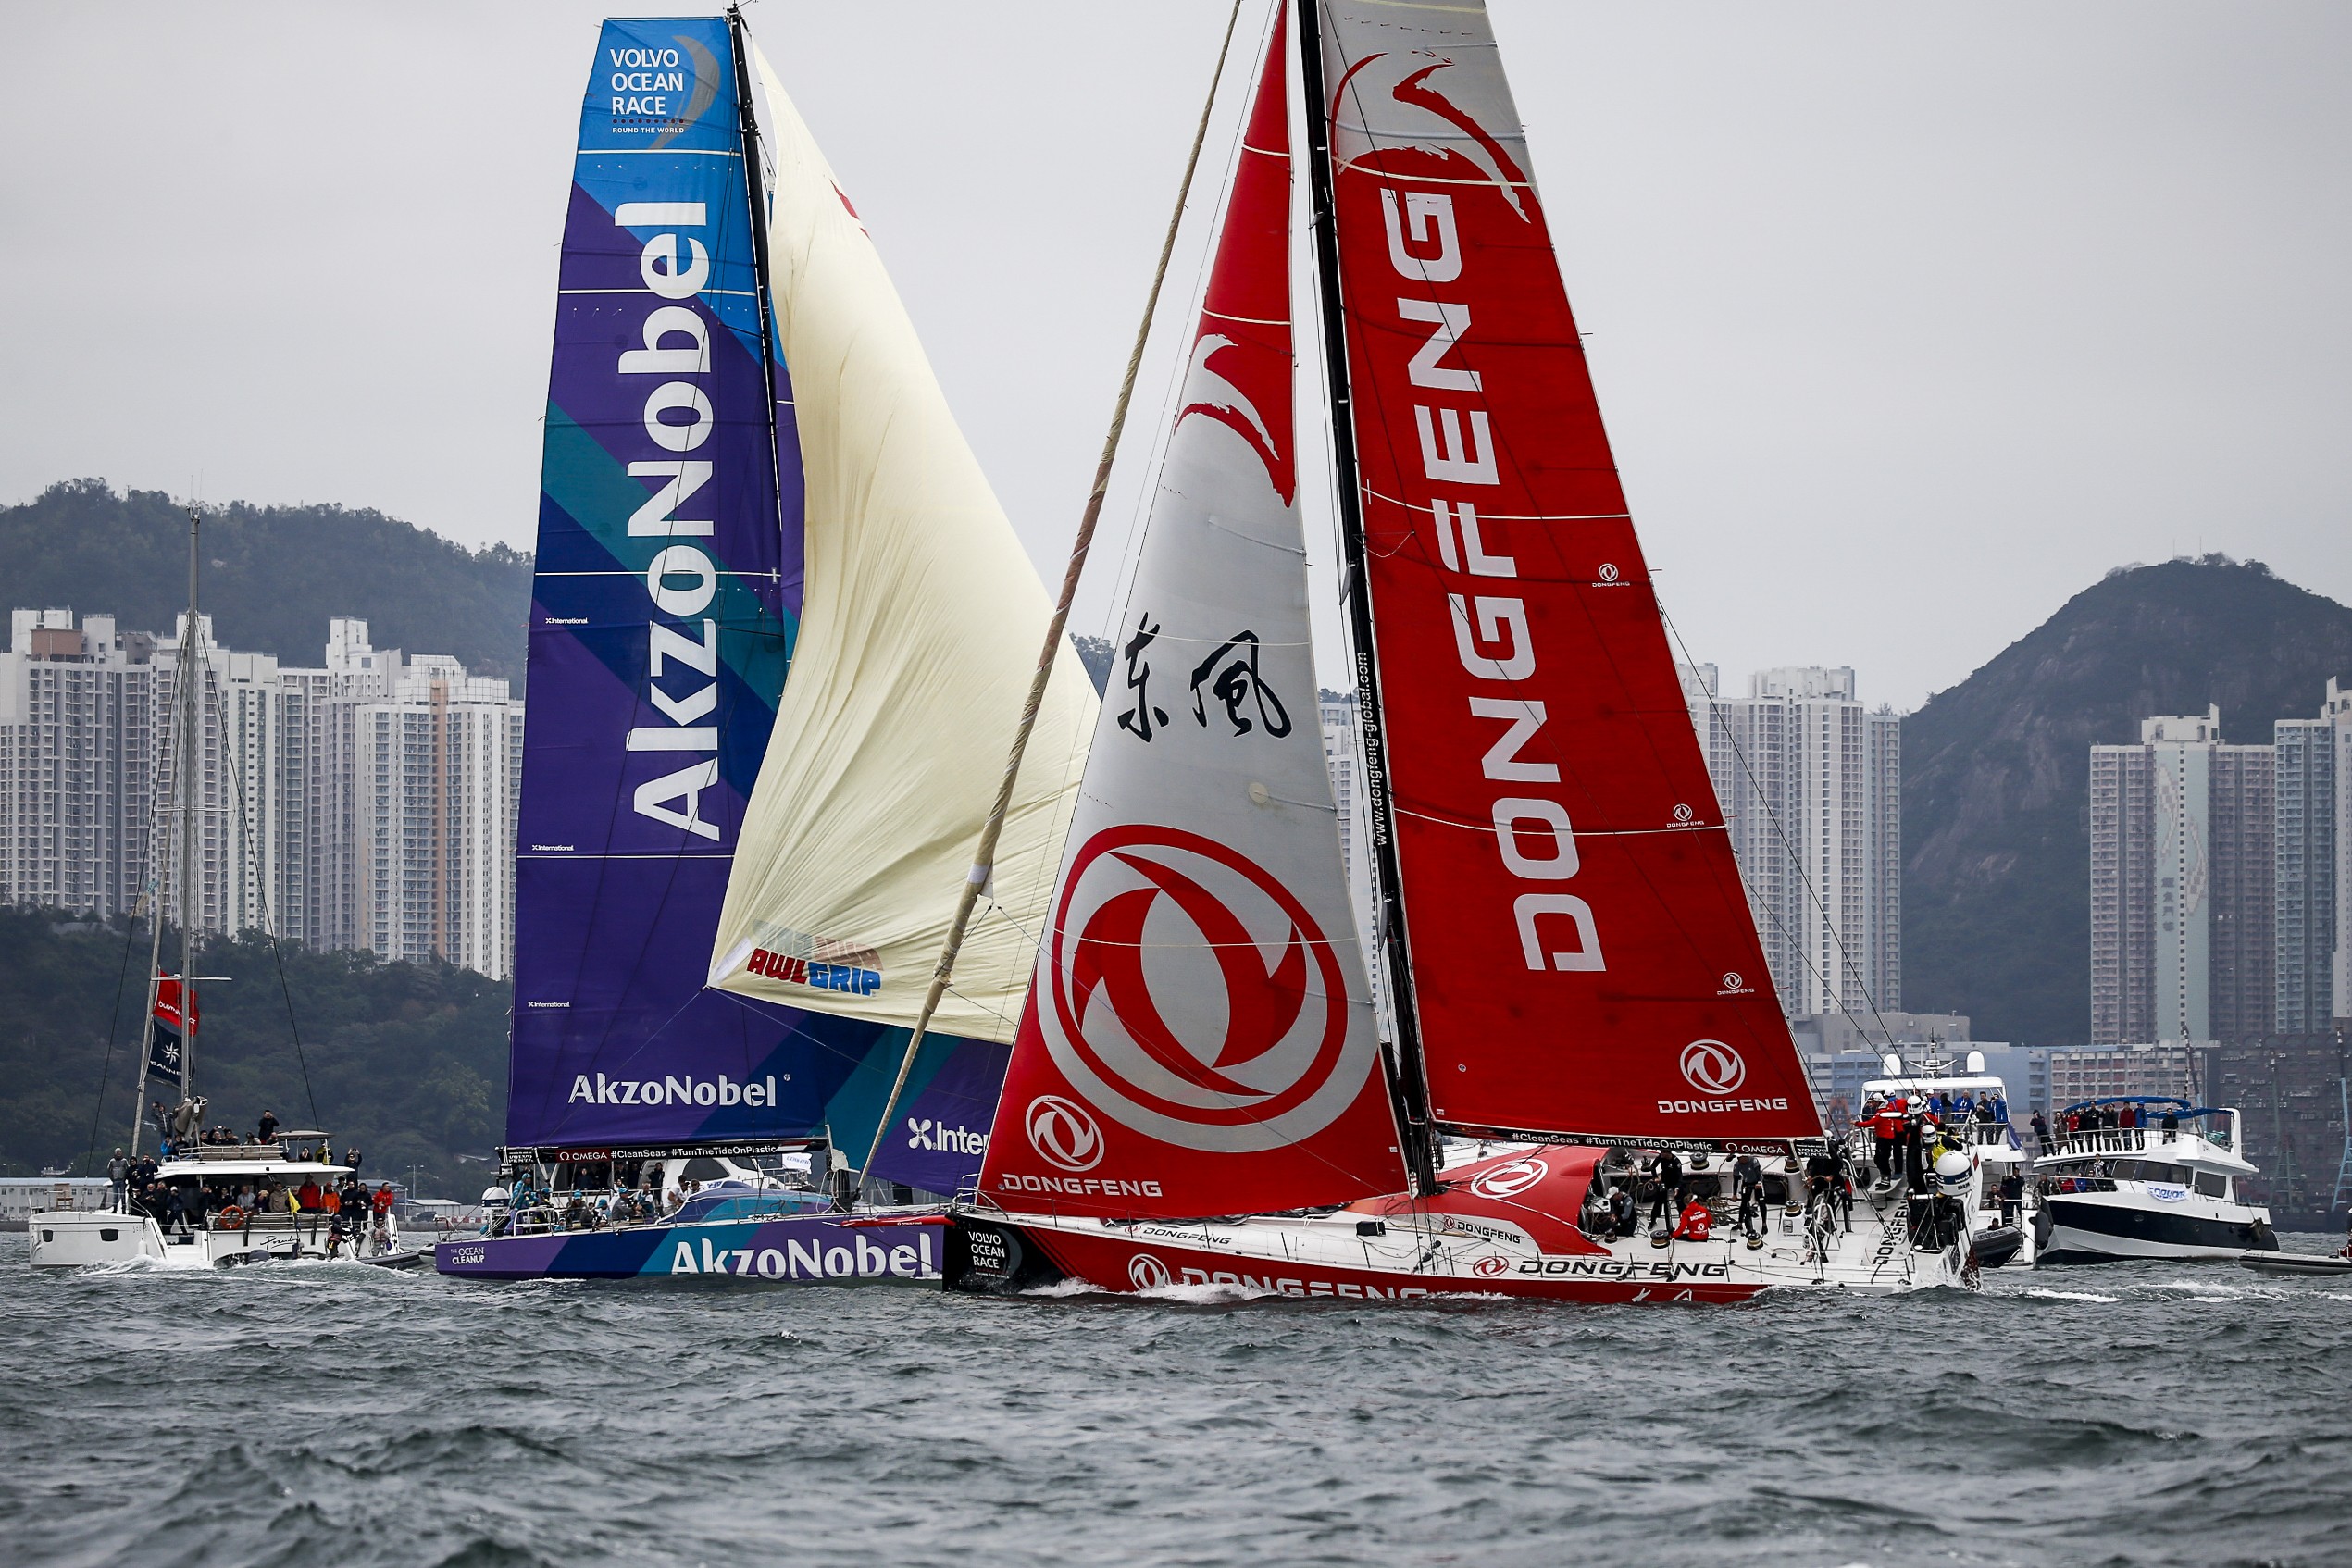 The In-Port Race is fought out during the Hong Kong stopover last year. Photo: Handout